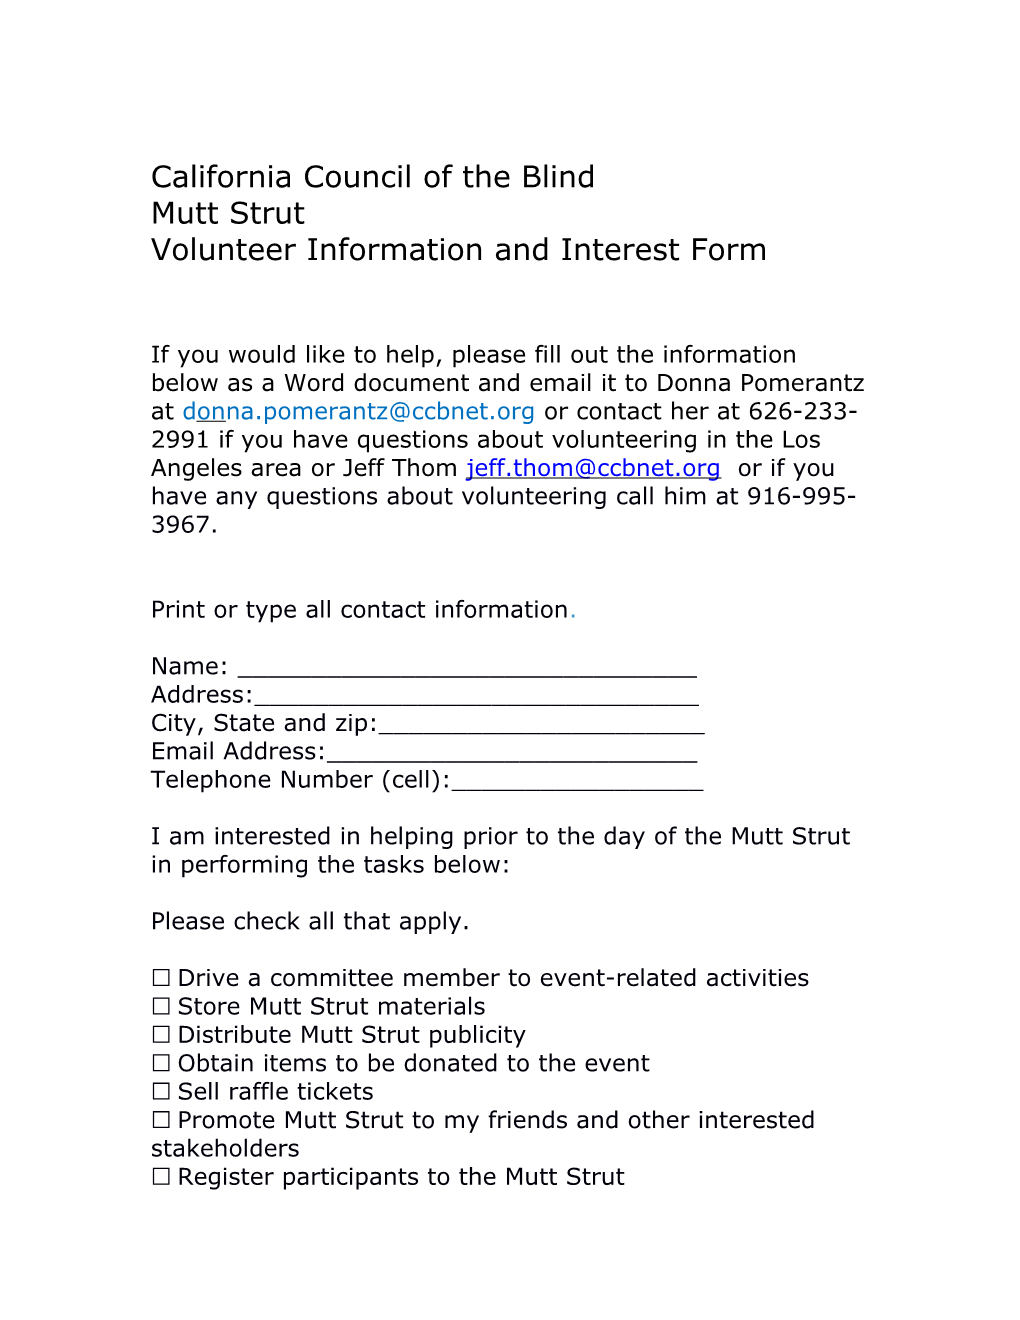 California Council of the Blind s1